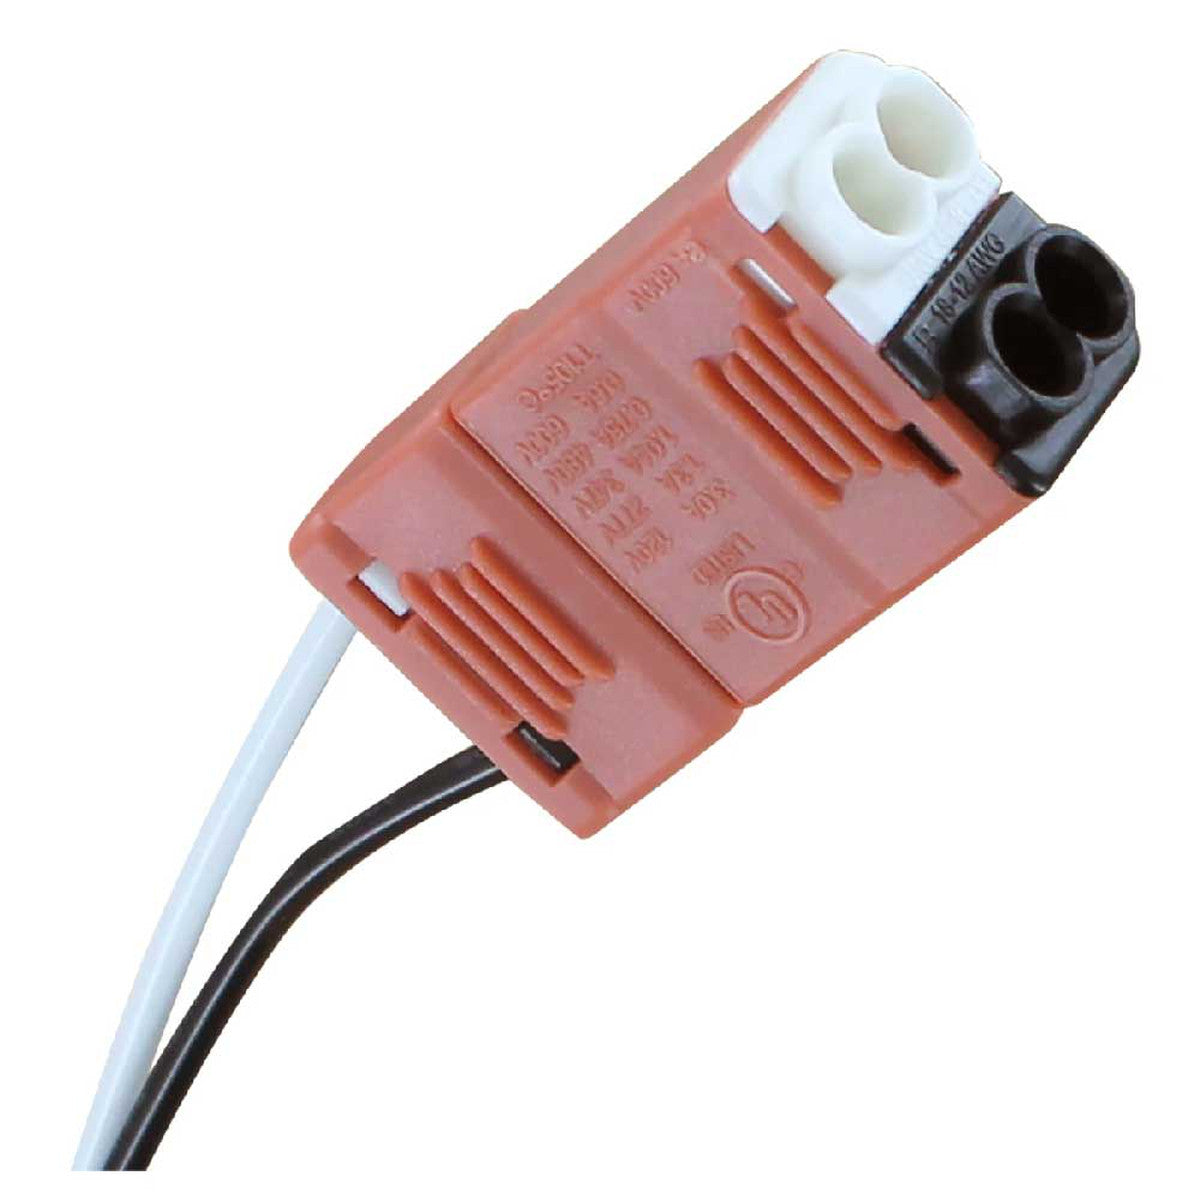 GLT GLT-SOCKET-T8-U-S-2-W 2-Lamp Wiring Harness with Short Non-shunted Sockets for LED Tubes